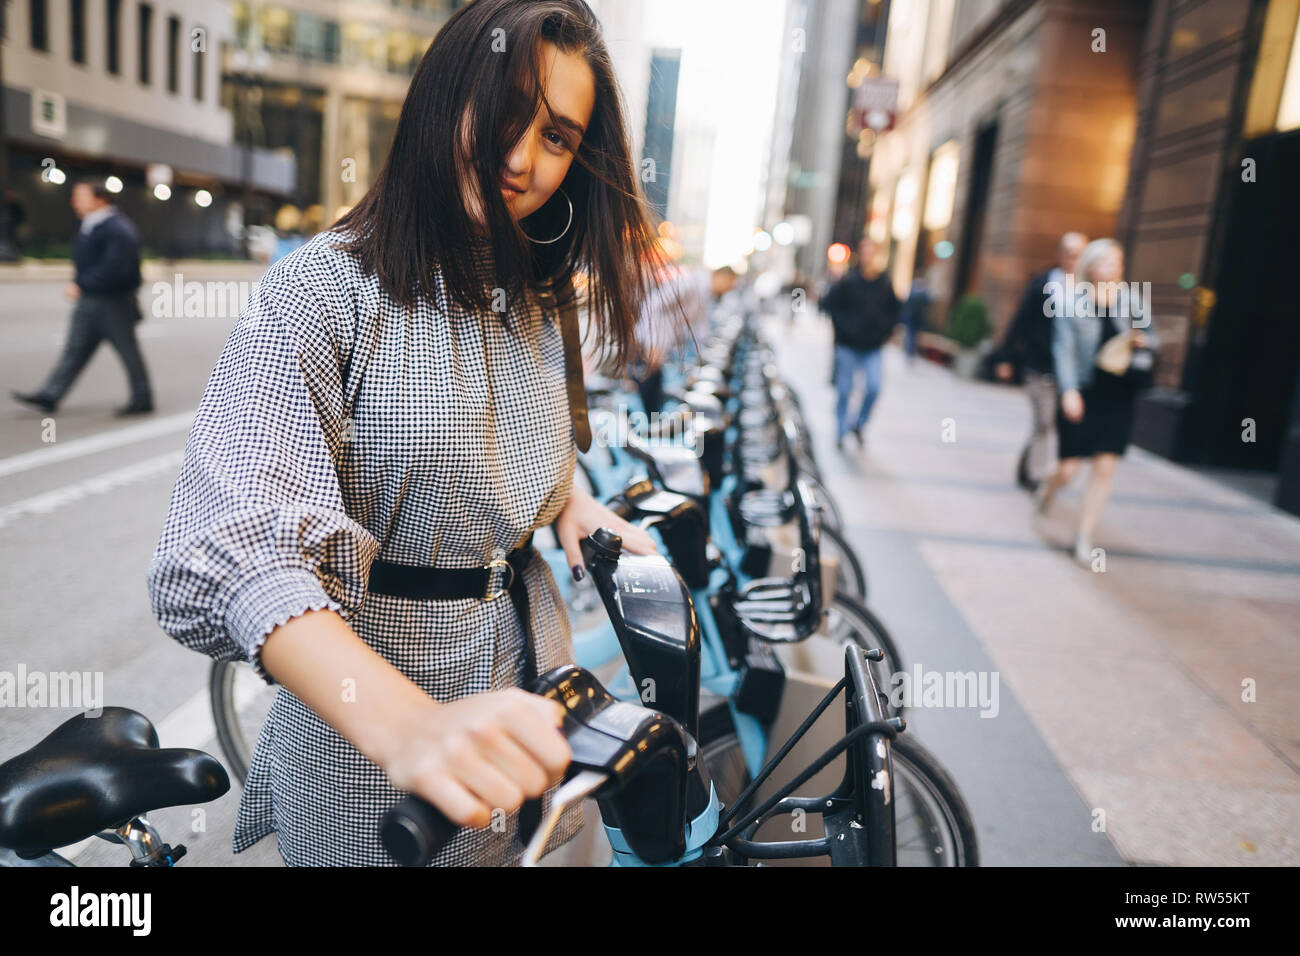 girl renting a city bike from a bike stand Stock Photo